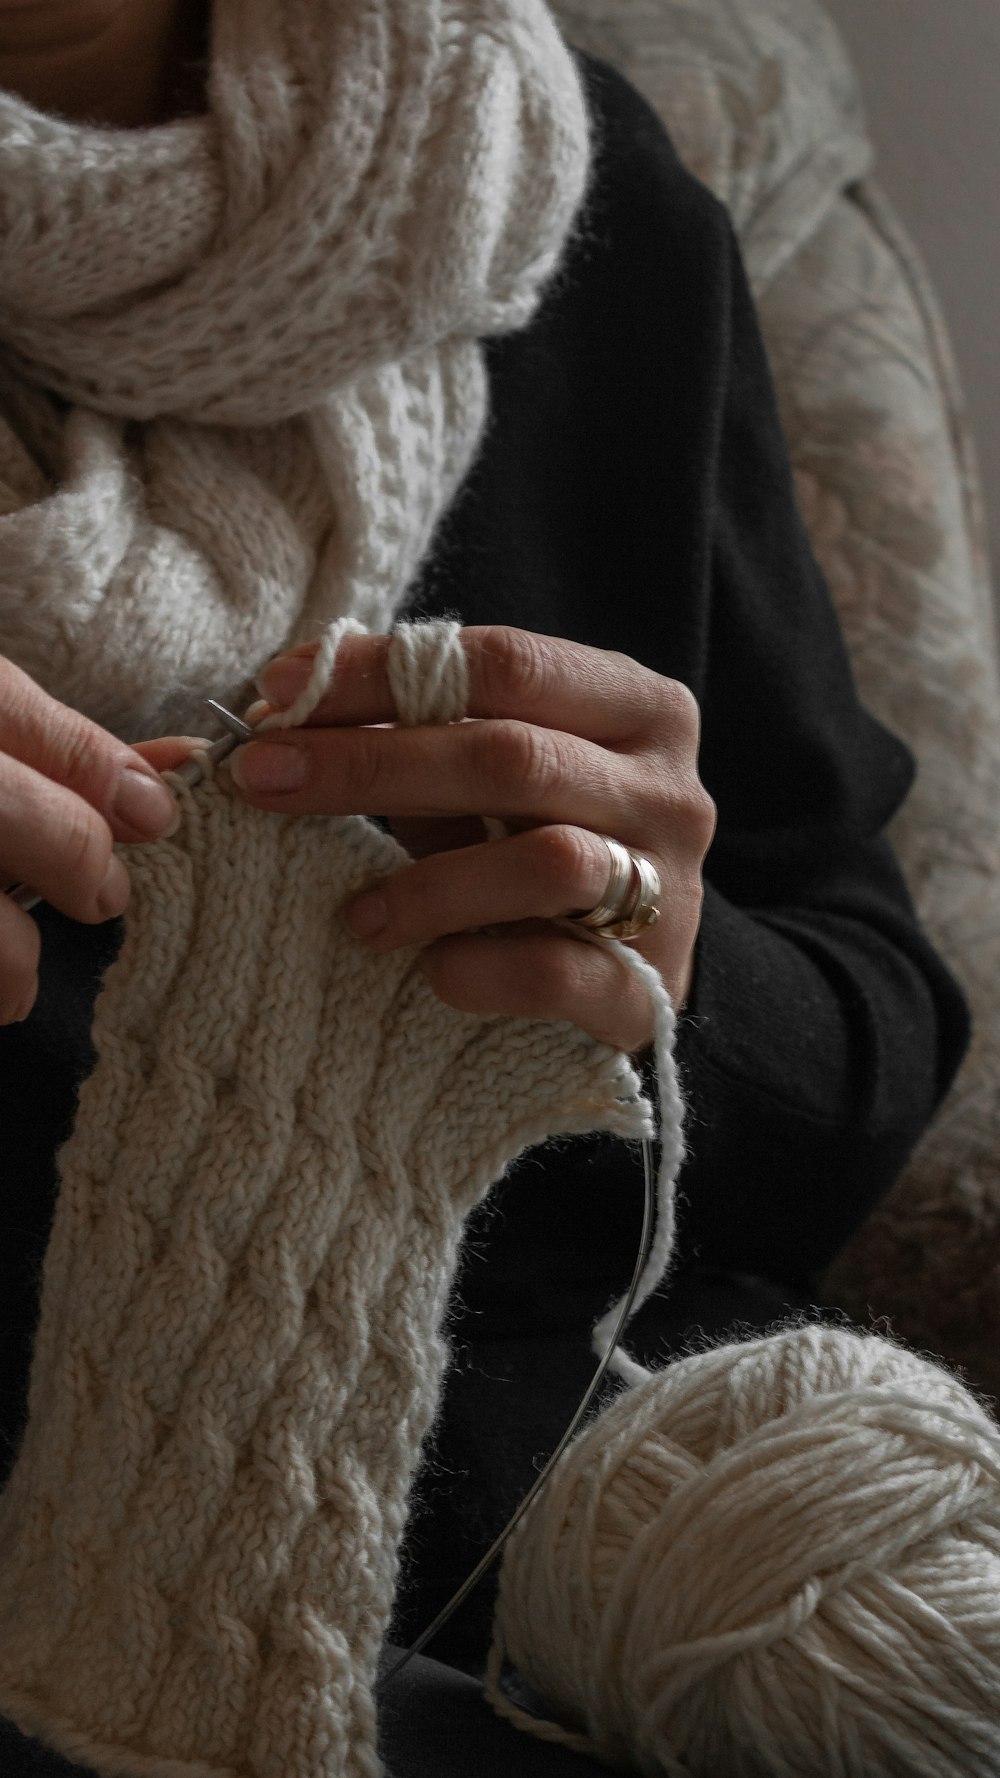 a woman knitting a sweater with a pair of scissors